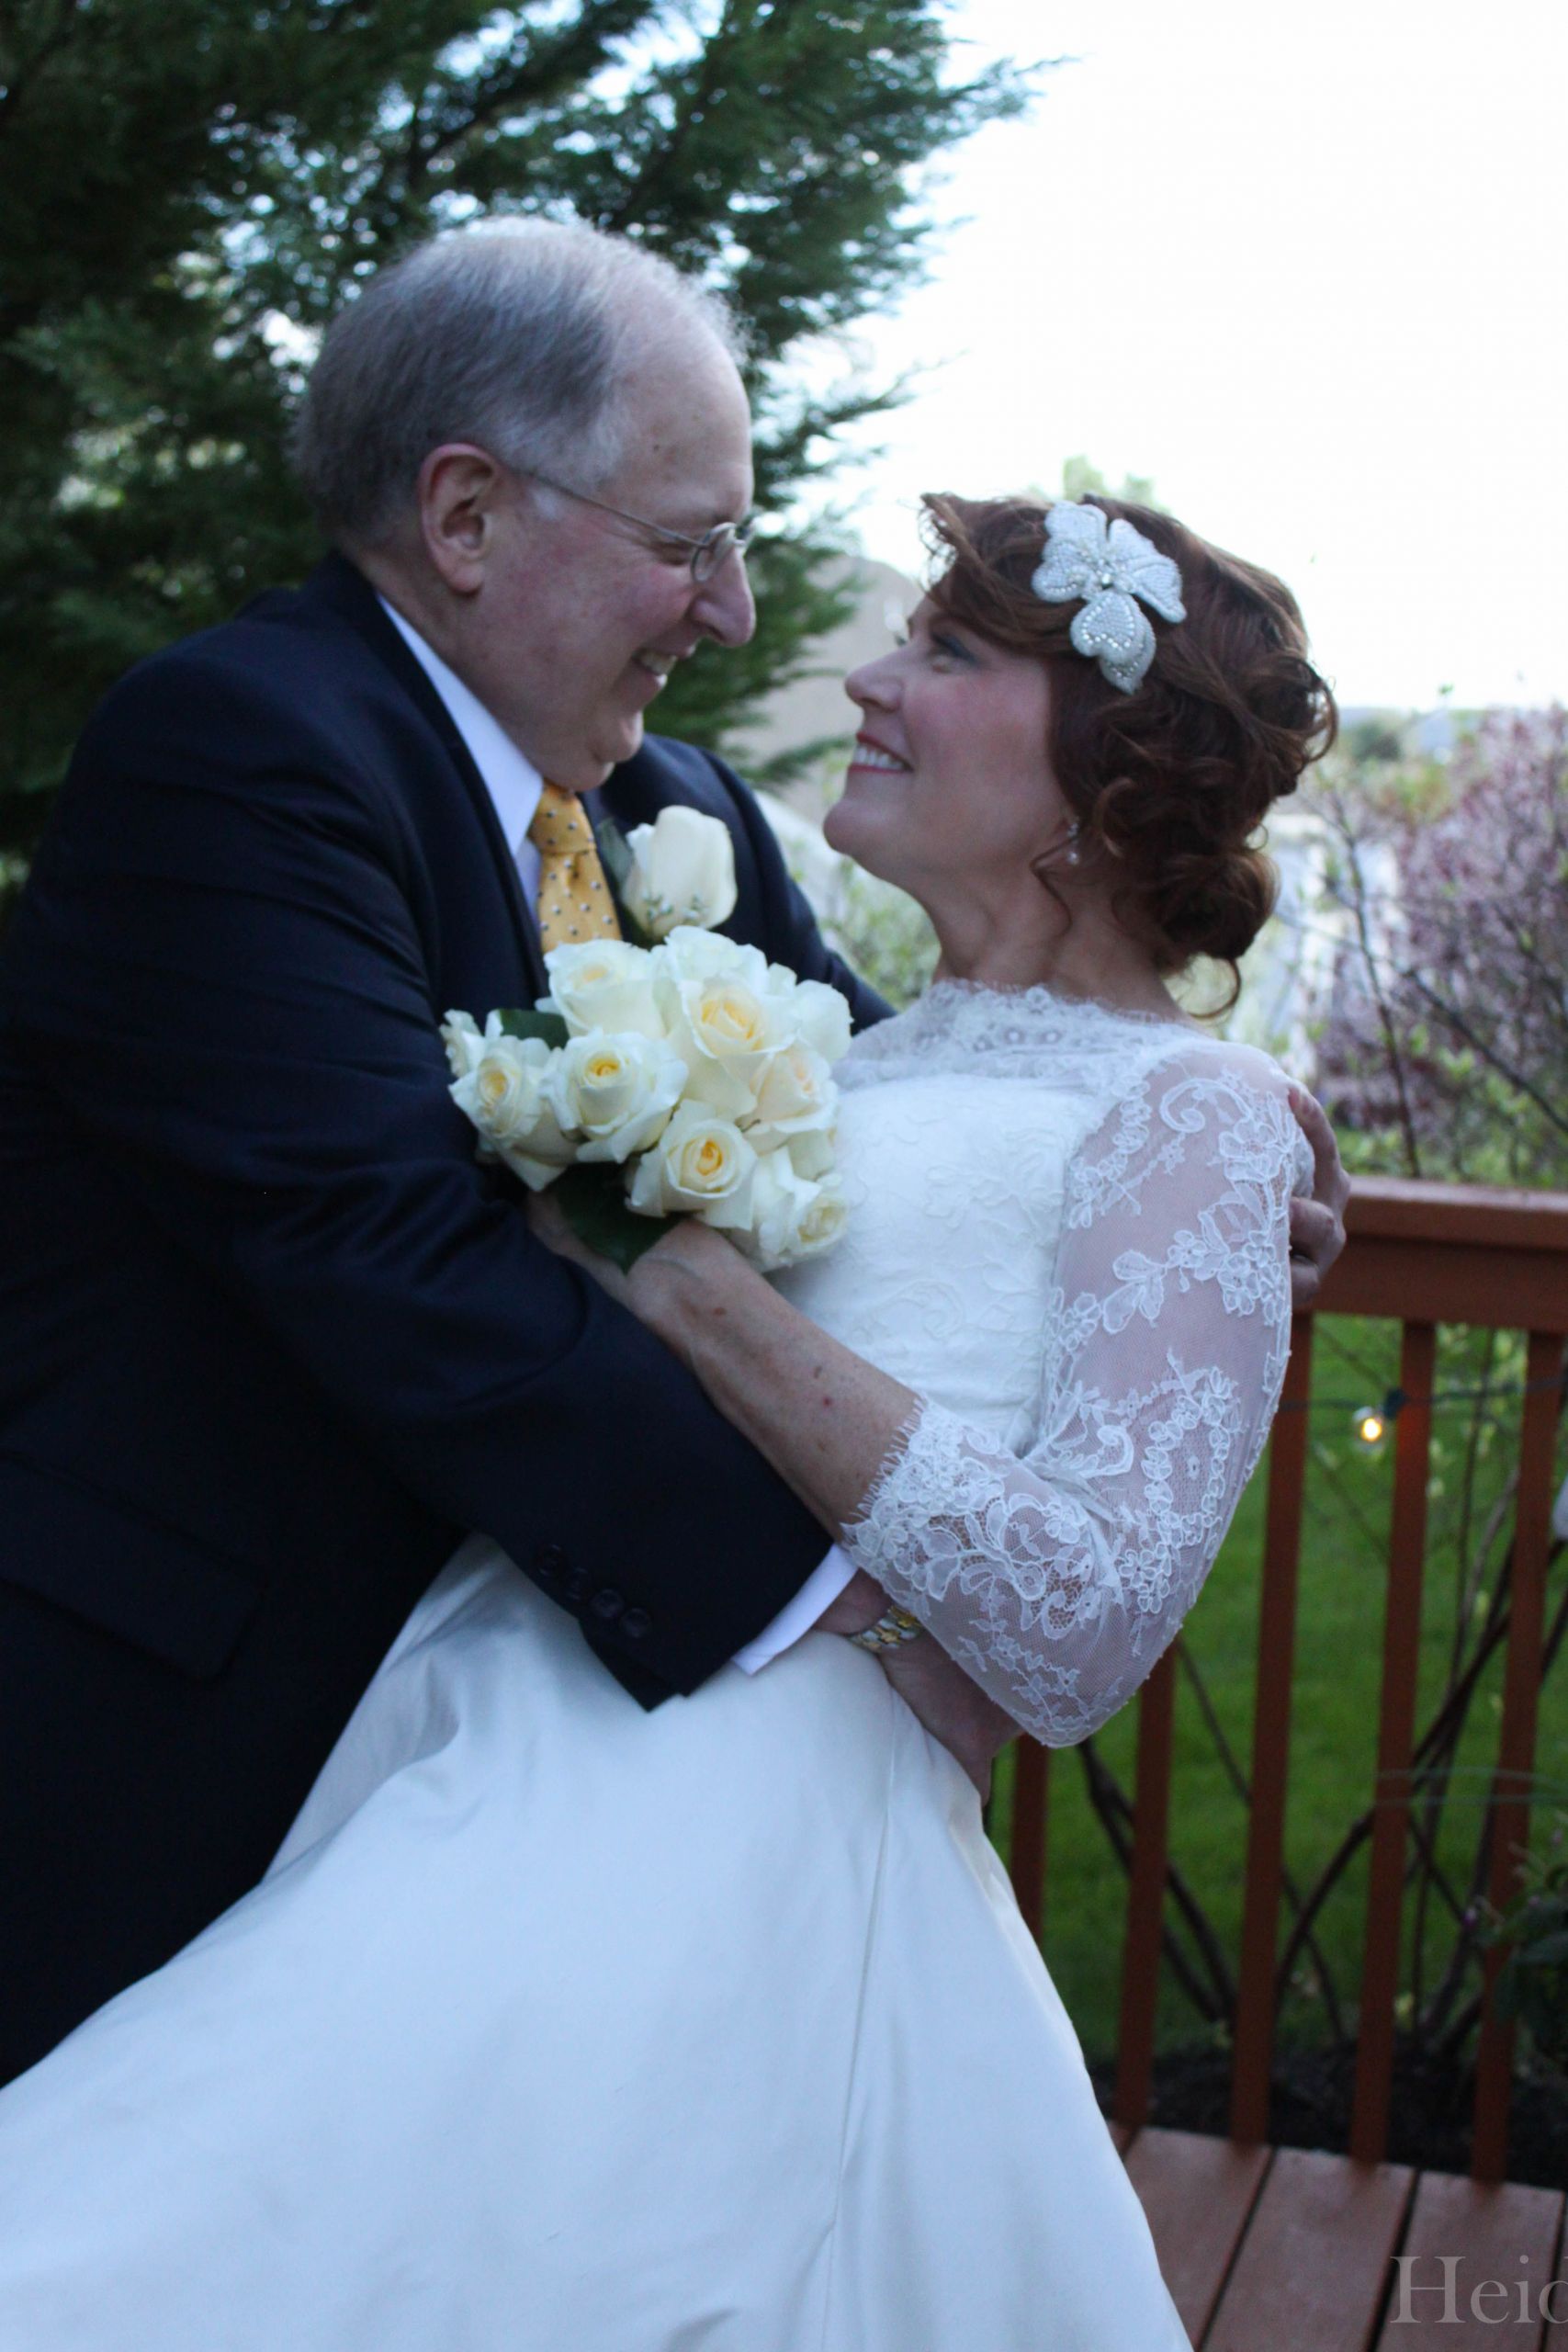 Wedding Vows For Older Couples
 Wedding graphy Older Couple in 2019